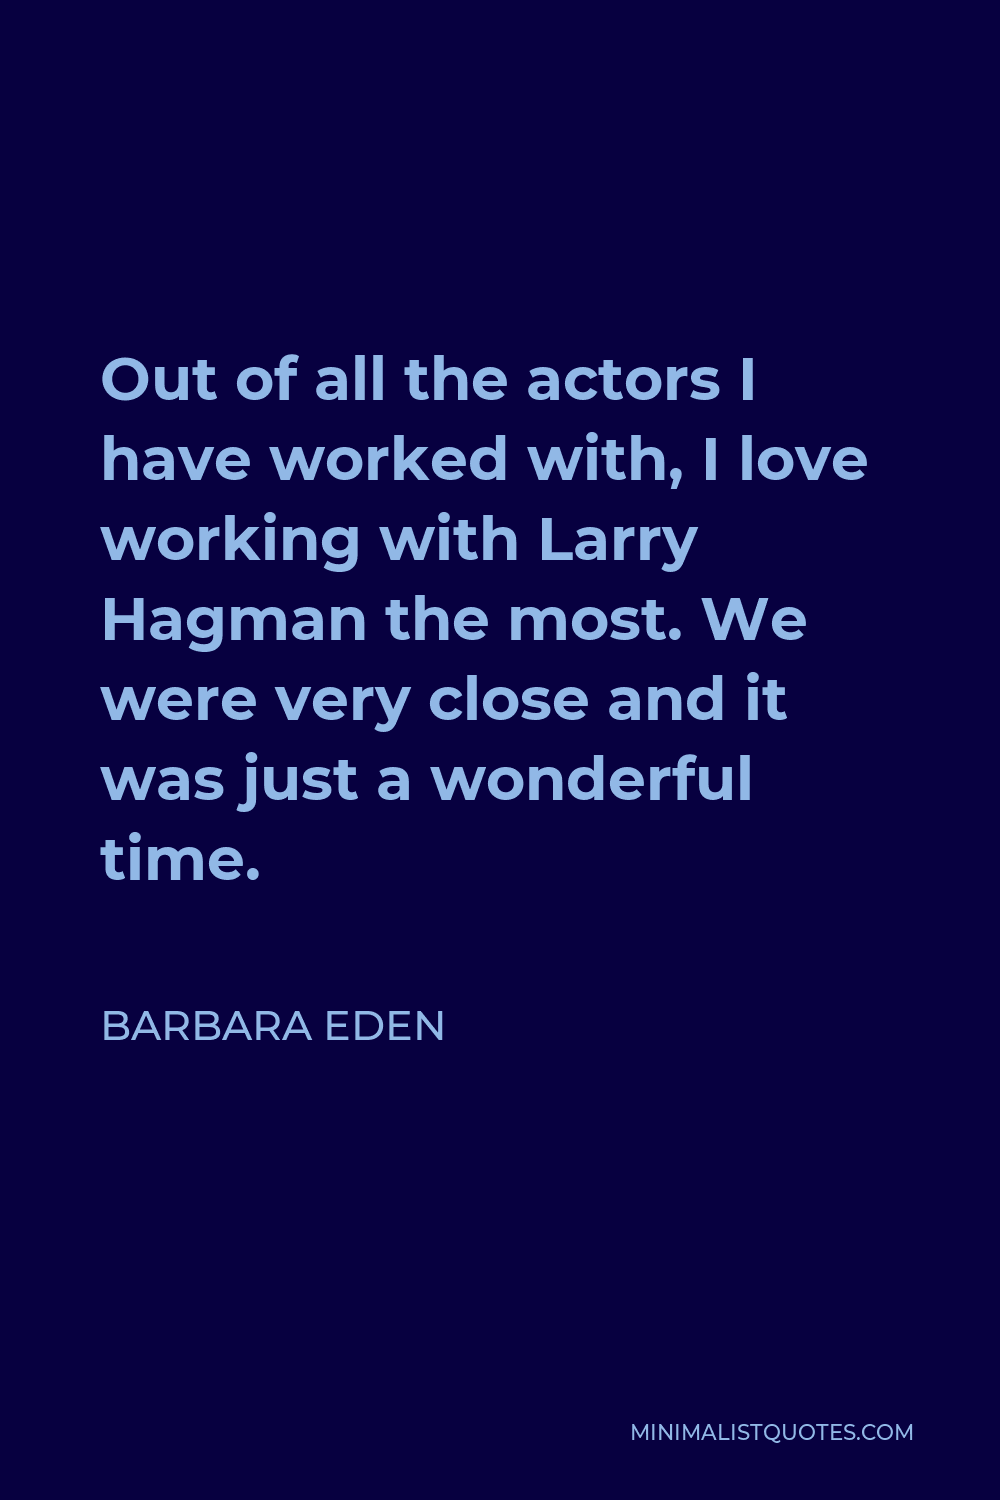 Barbara Eden Quote - Out of all the actors I have worked with, I love working with Larry Hagman the most. We were very close and it was just a wonderful time.